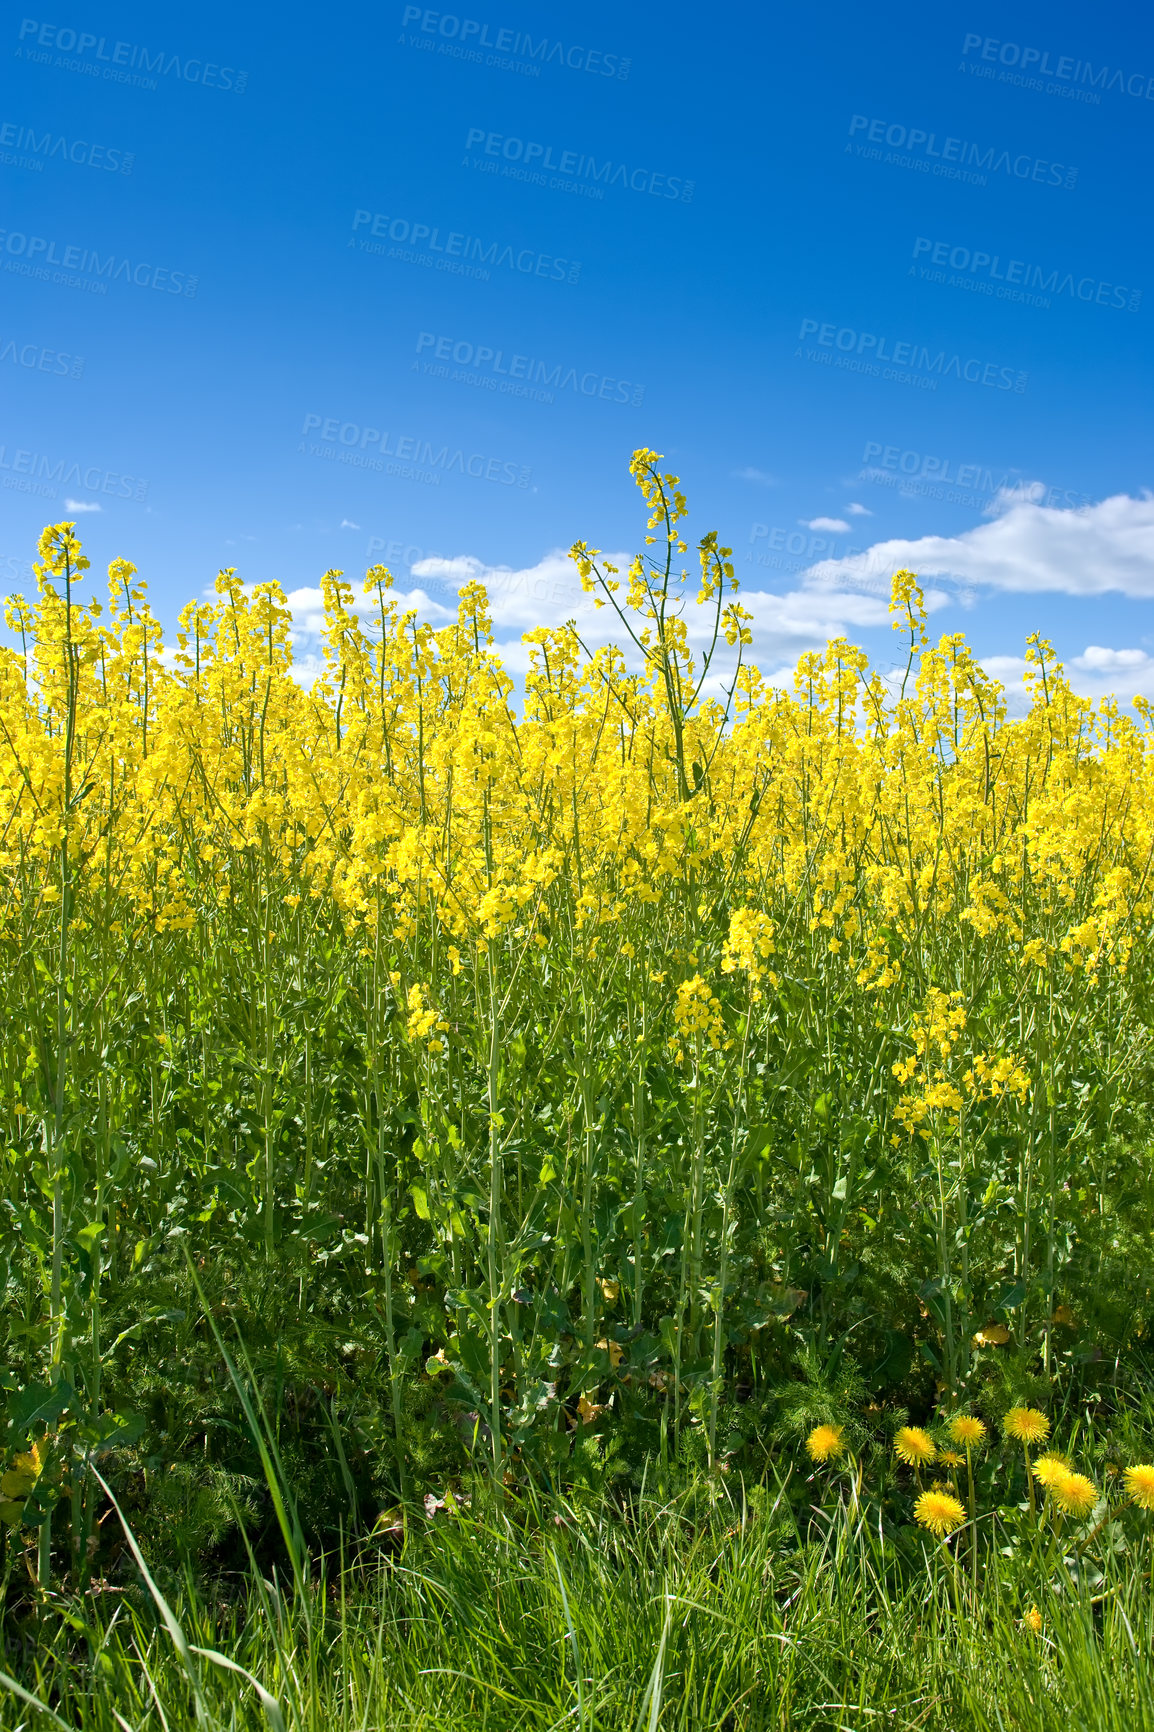 Buy stock photo Sky, field or environment with grass for flowers, agro farming or sustainable growth in nature. Background, yellow canola plants or landscape of meadow, lawn or natural pasture for crops and ecology